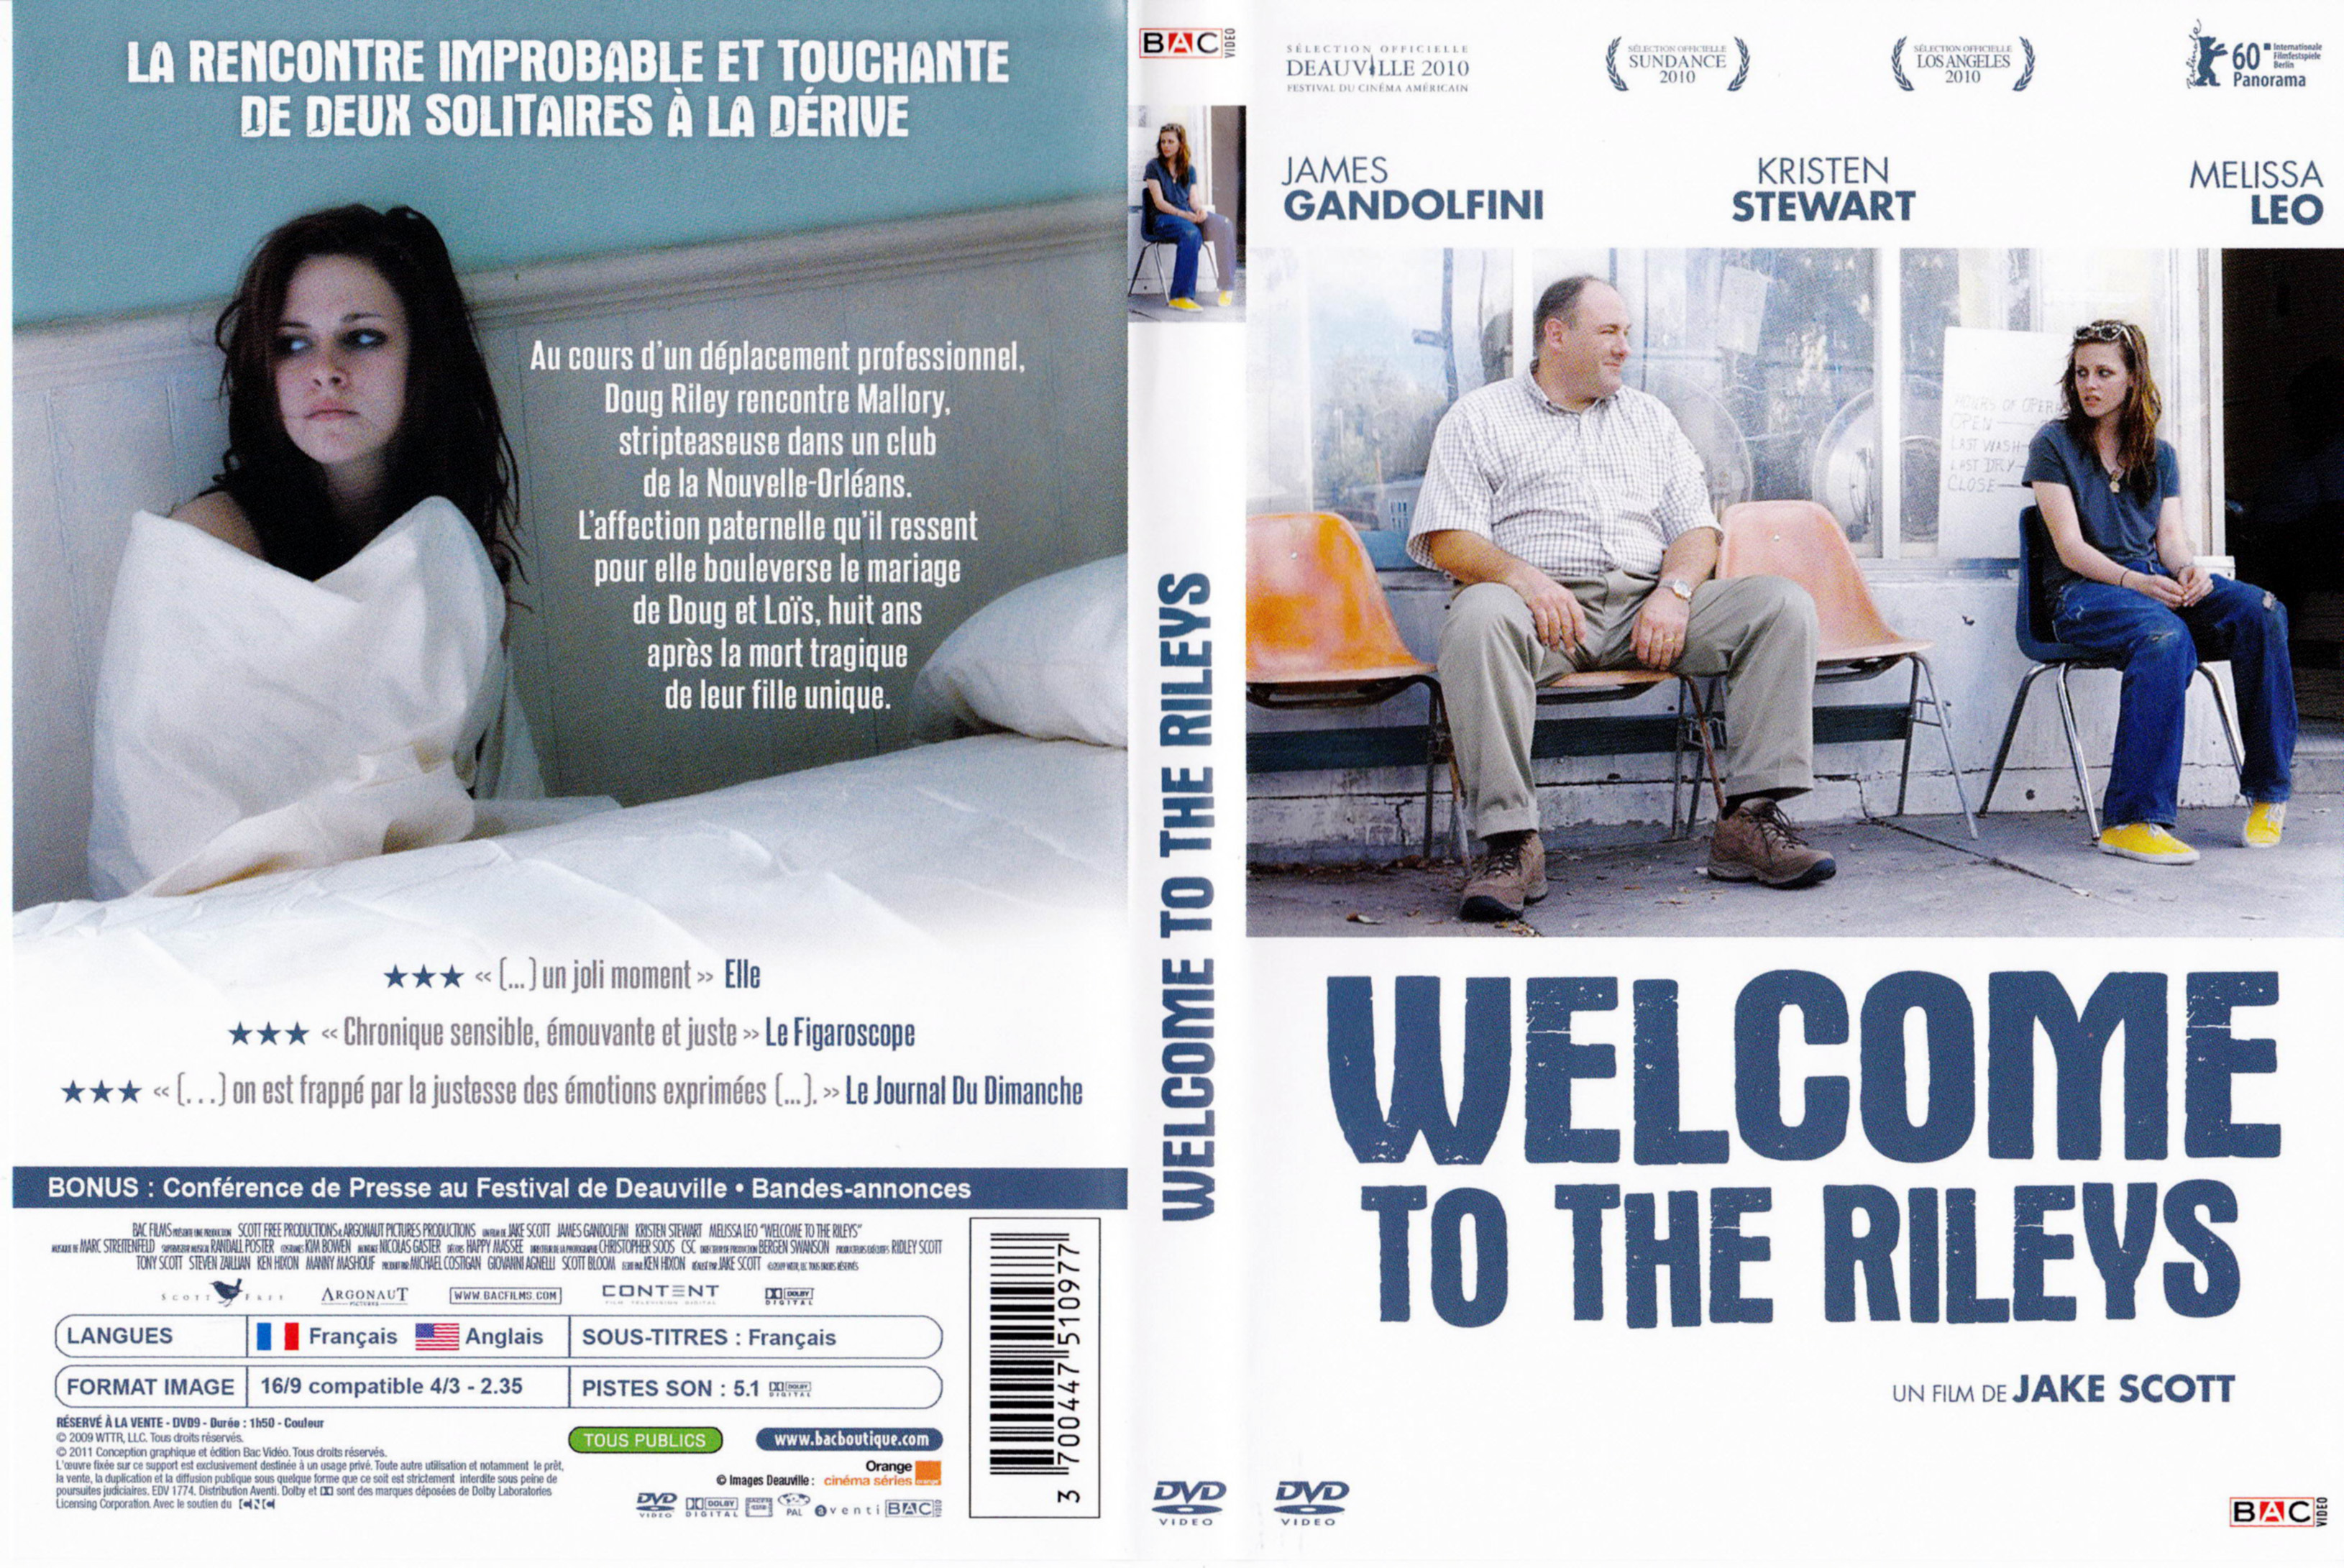 Jaquette DVD Welcome to the Rileys